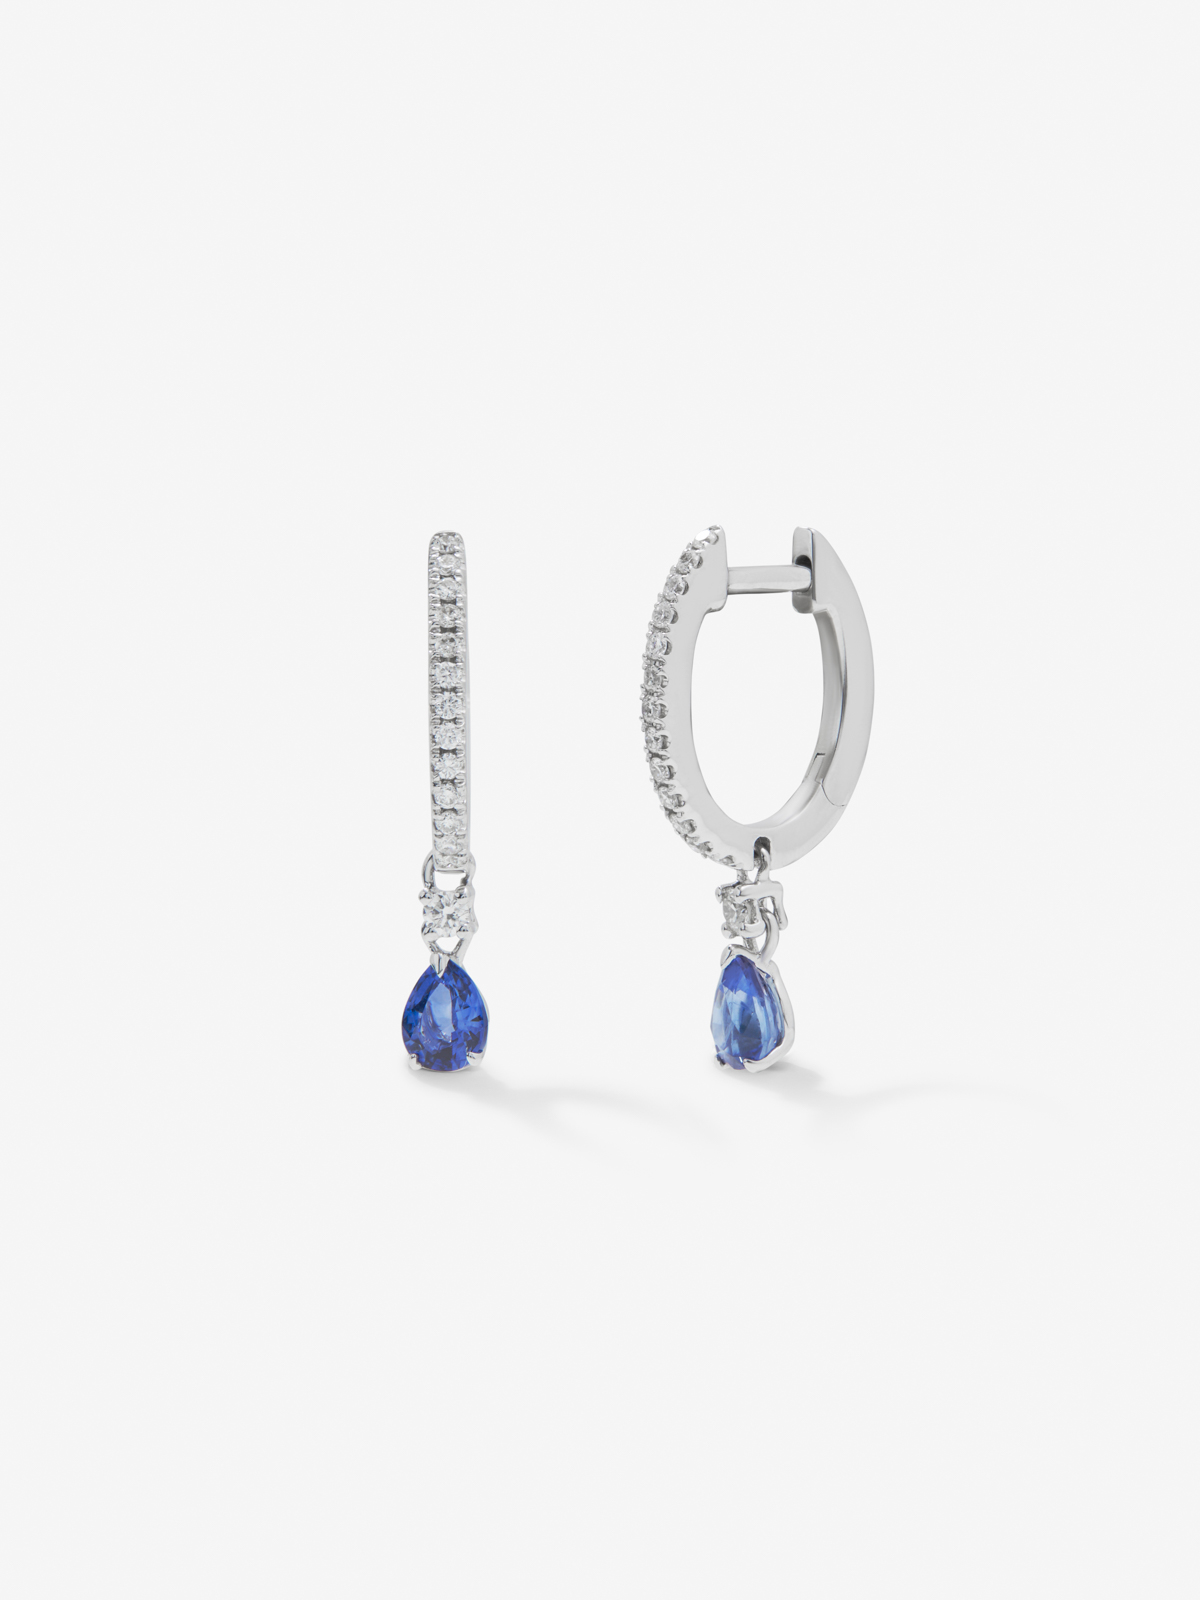 18K White Gold Aro Earrings with Blue Zafiros in 0.51 cts and white diamonds in Blind Size of 0.16 CTS